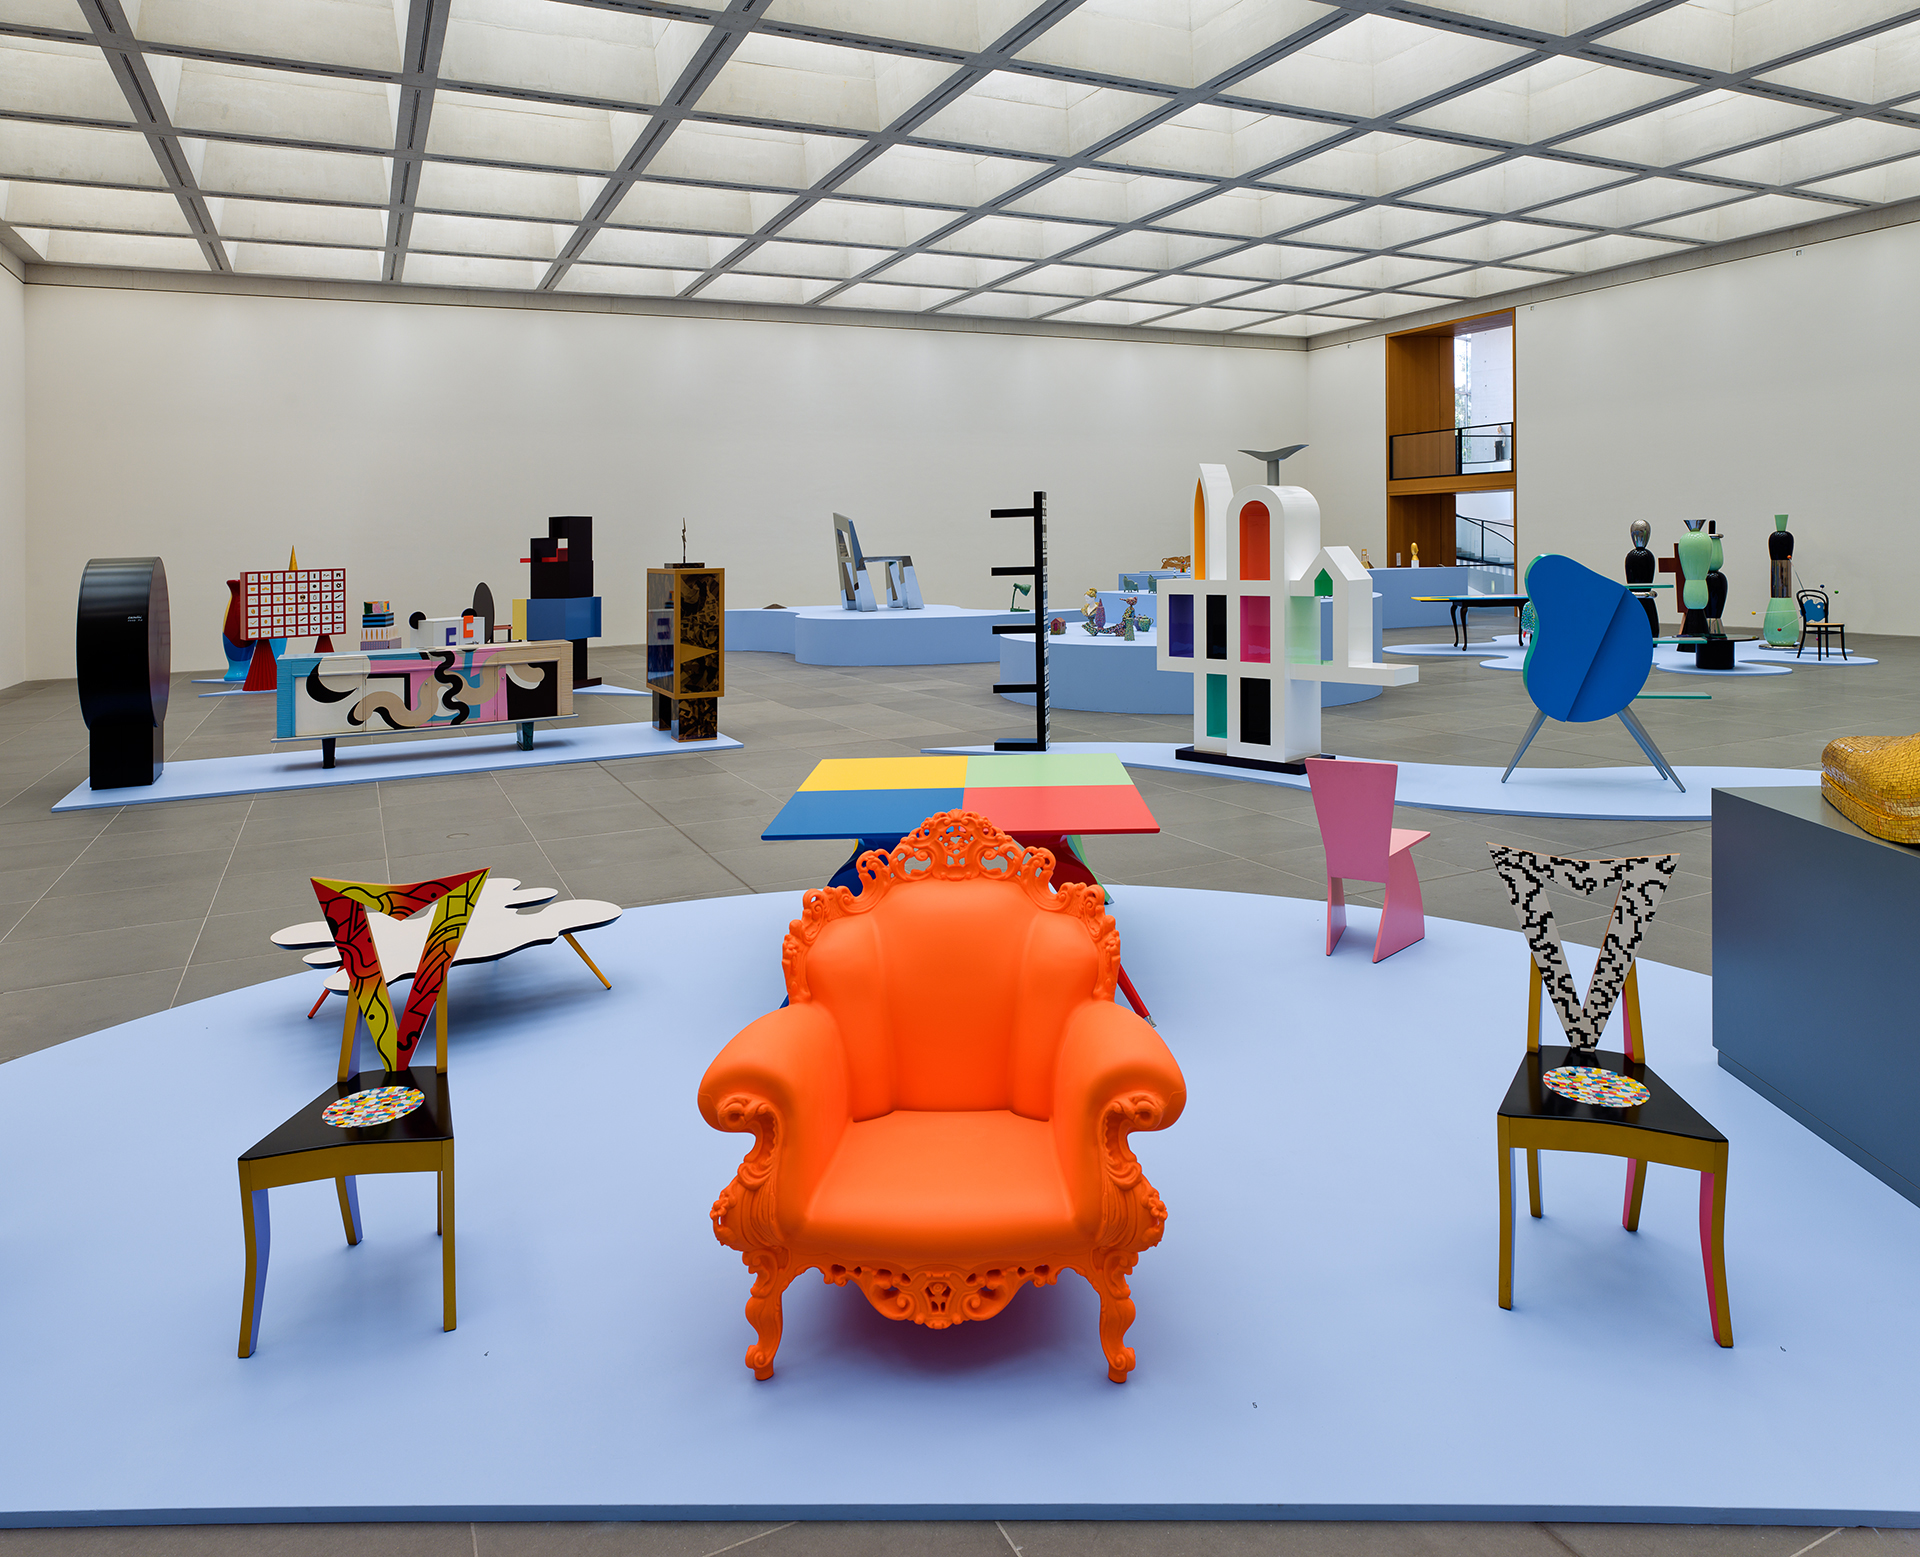 View of the exhibition. On display are several design objects in various bright colors and shapes. In the foreground are three chairs - on the left and right a wooden chair with a triangular backrest and in the middle an orange armchair with ornaments. The group of chairs is placed on a light blue, round background, as are the groupings of individual exhibits in the background.